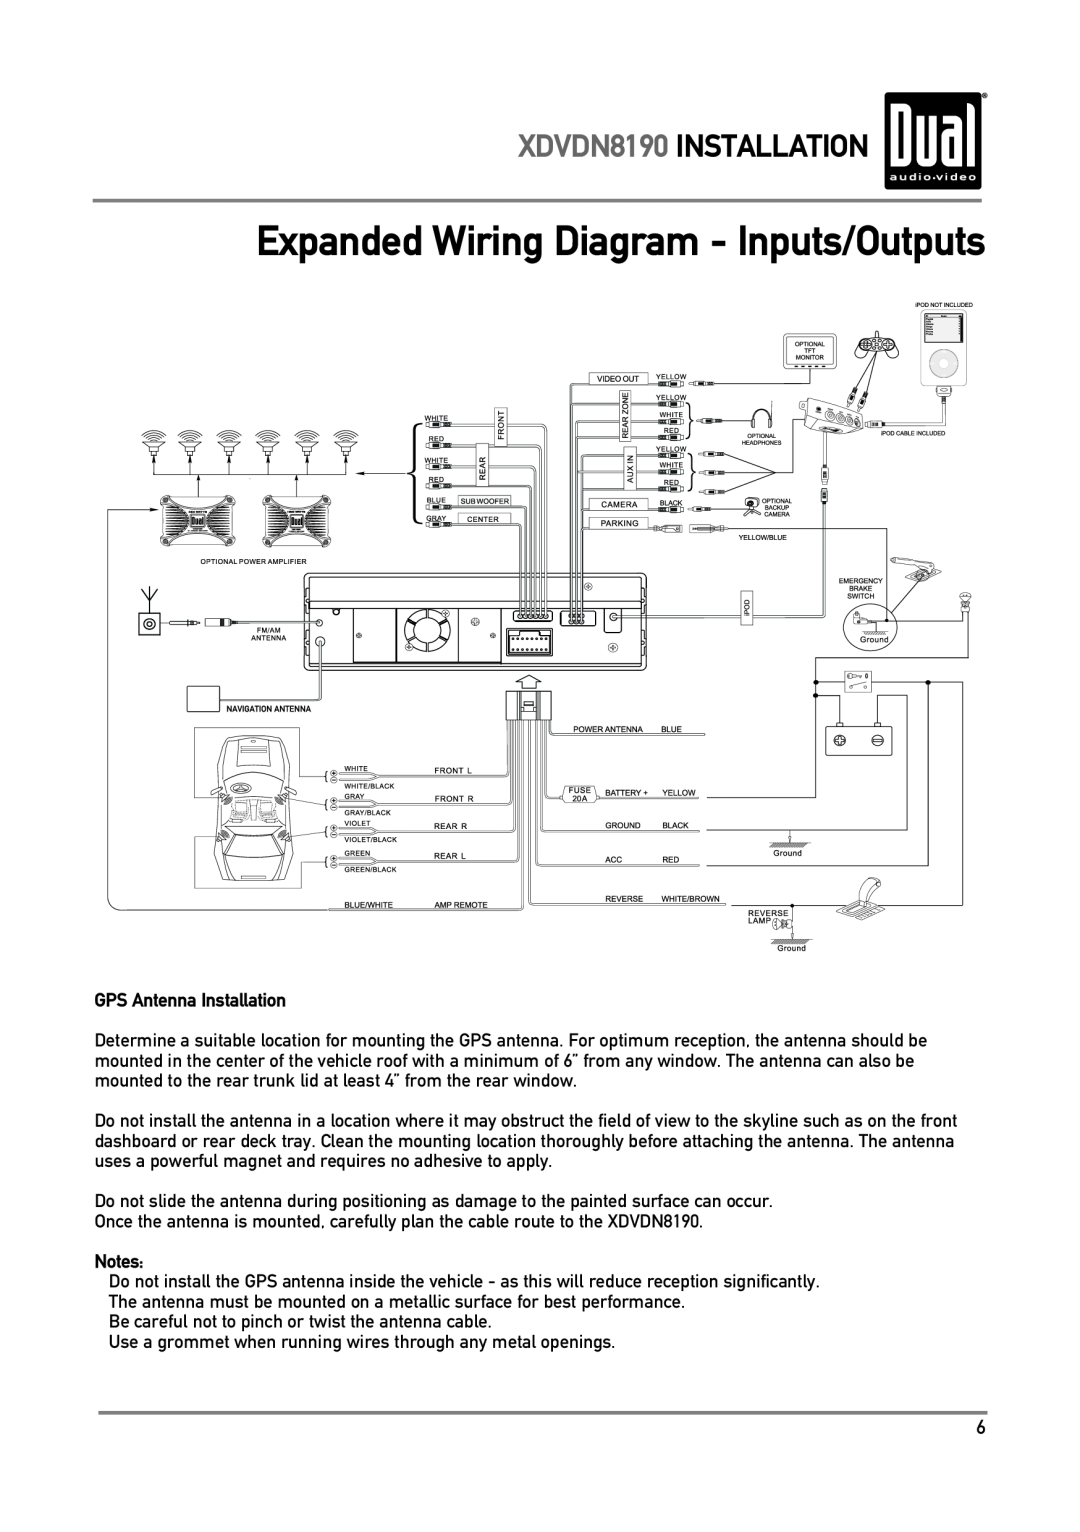 Dual owner manual Expanded Wiring Diagram - Inputs/Outputs, XDVDN8190 INSTALLATION, GPS Antenna Installation, Notes 